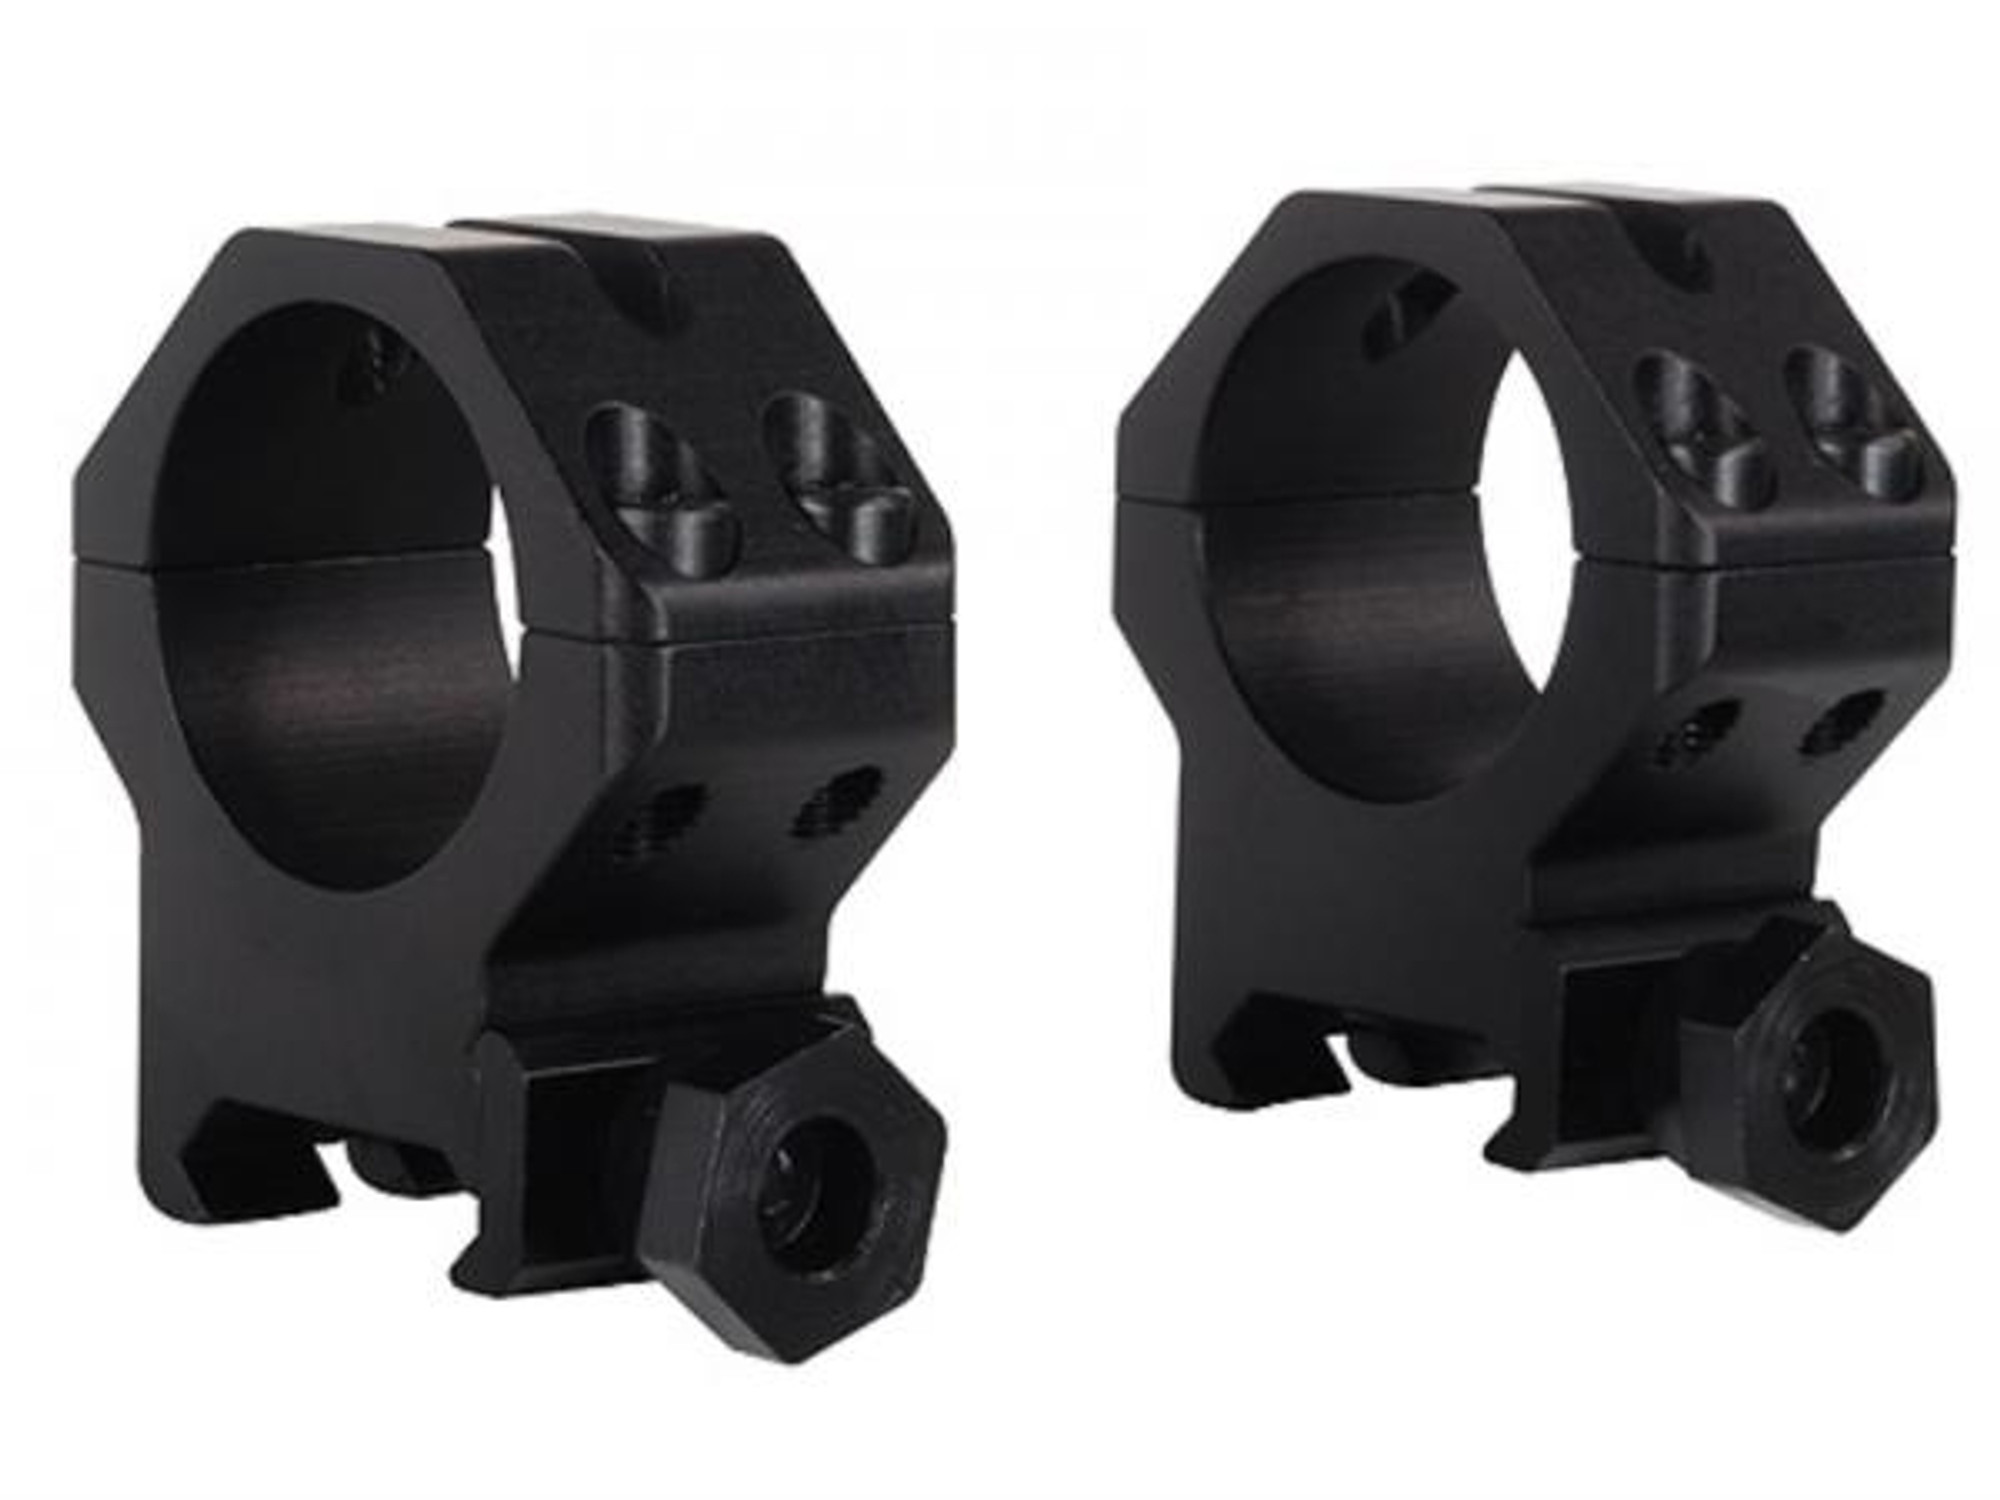 Four Hole Tactical Rings 1" High